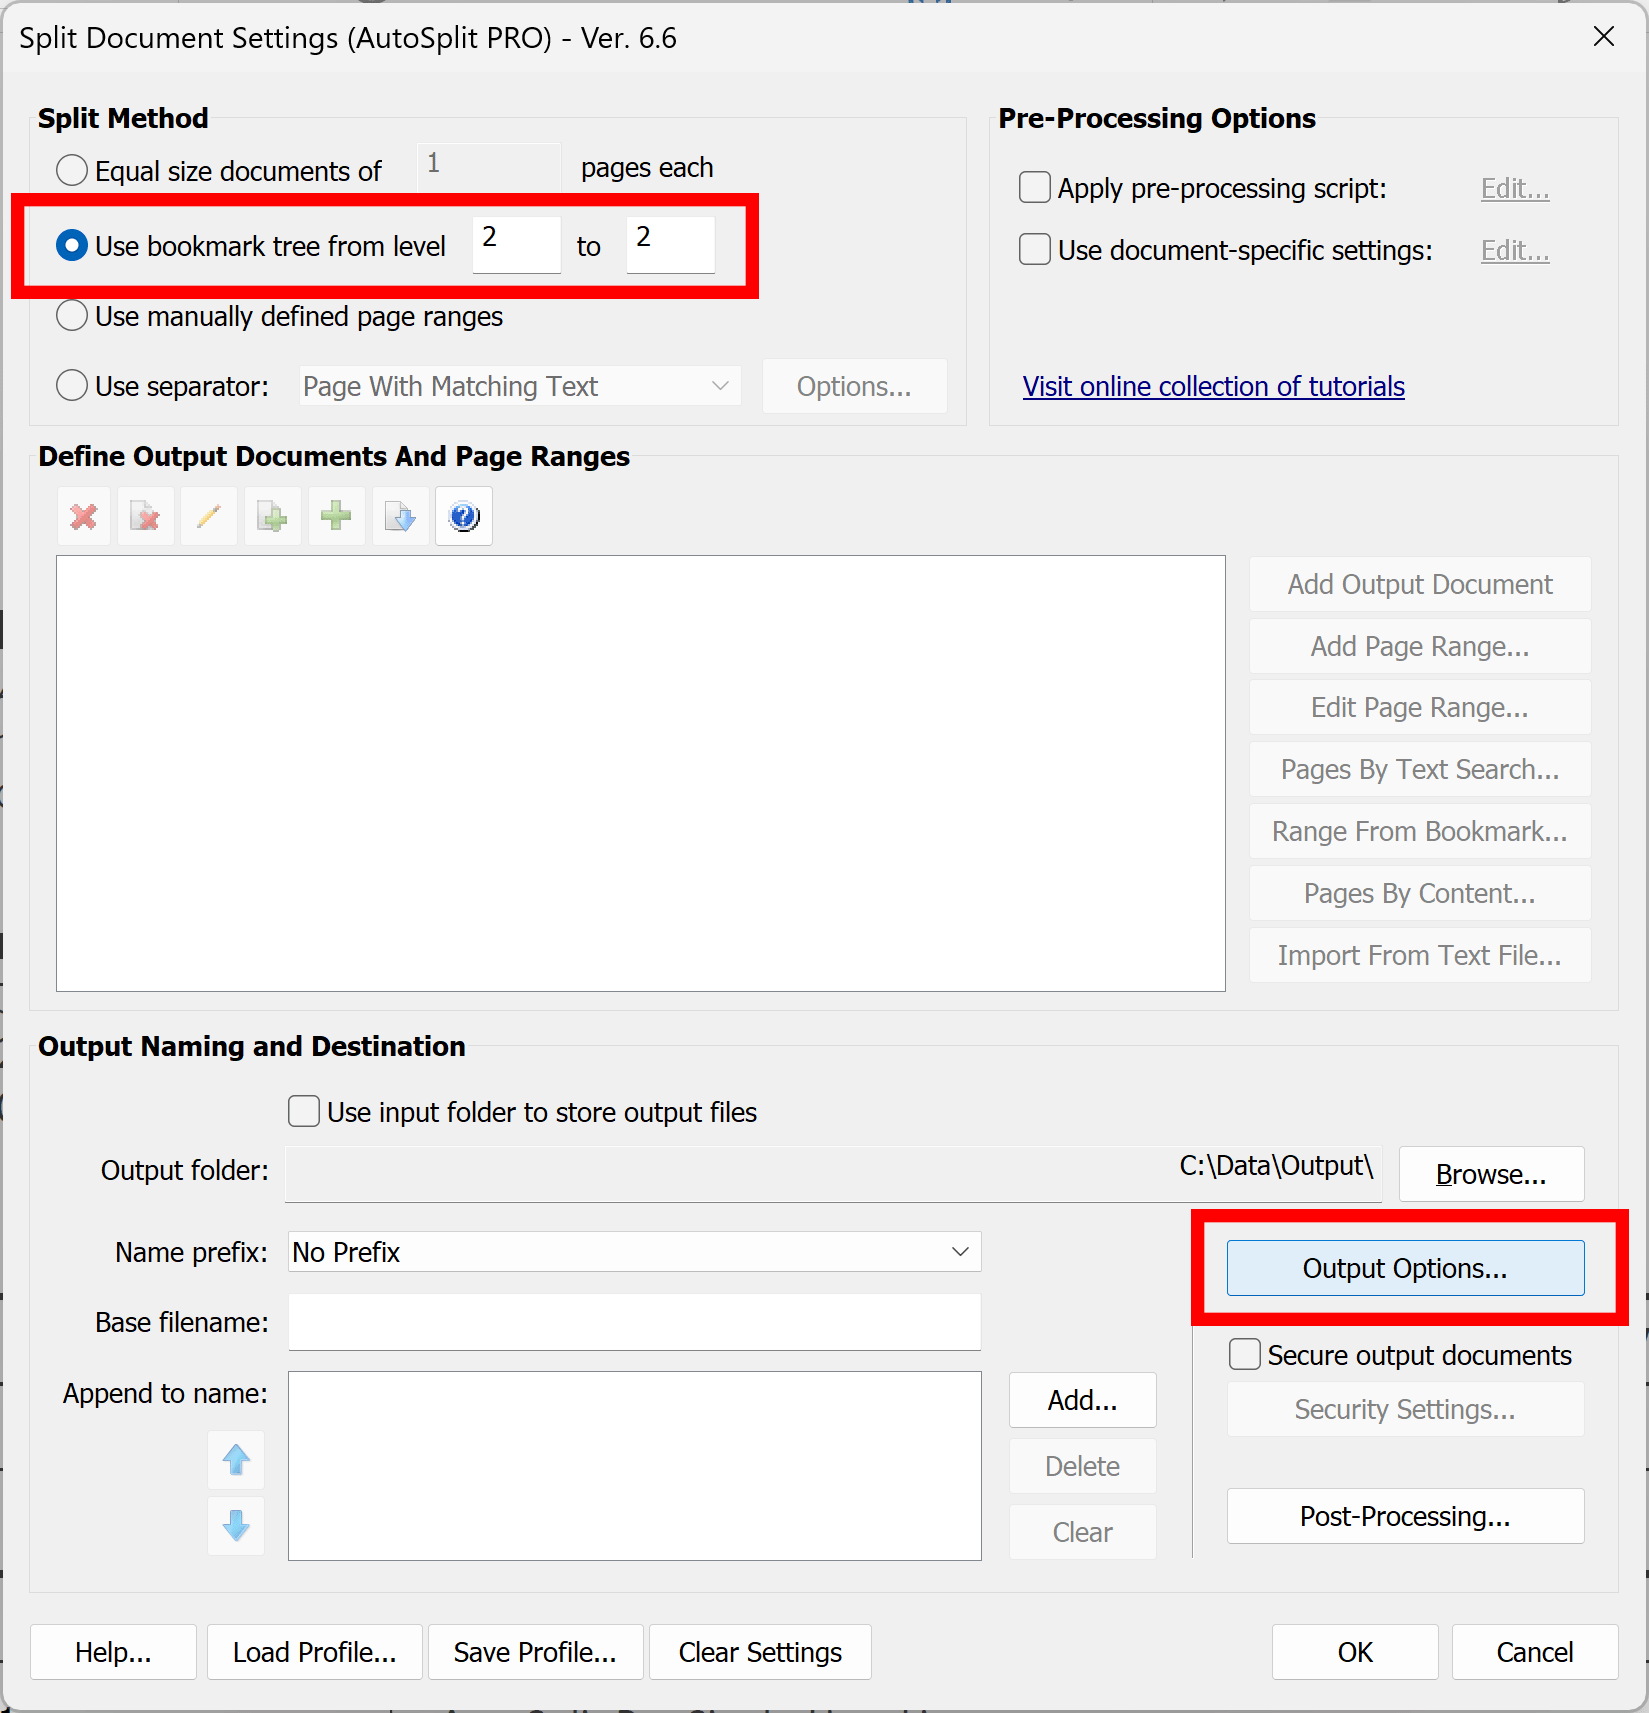 Select splitting by bookmarks option